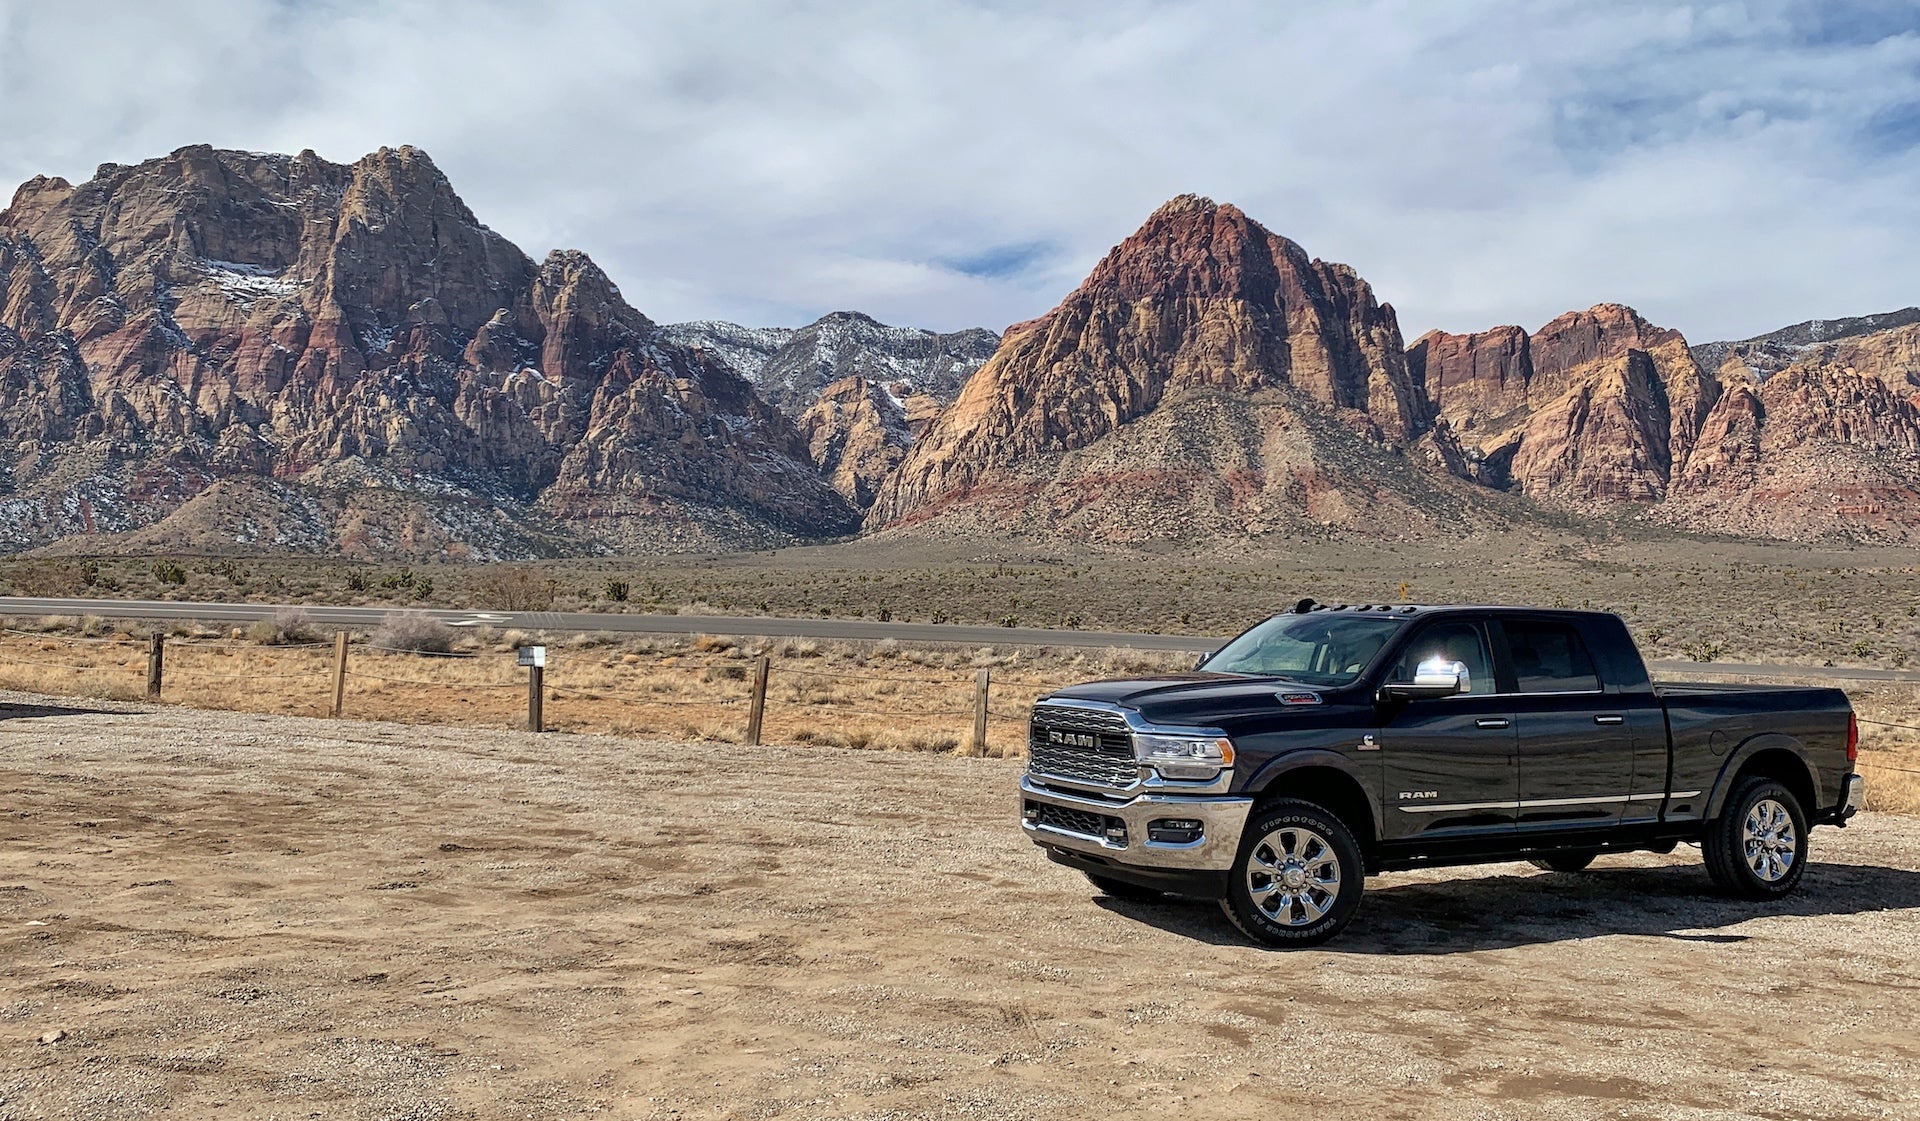 2019 Ram Heavy Duty first drive review